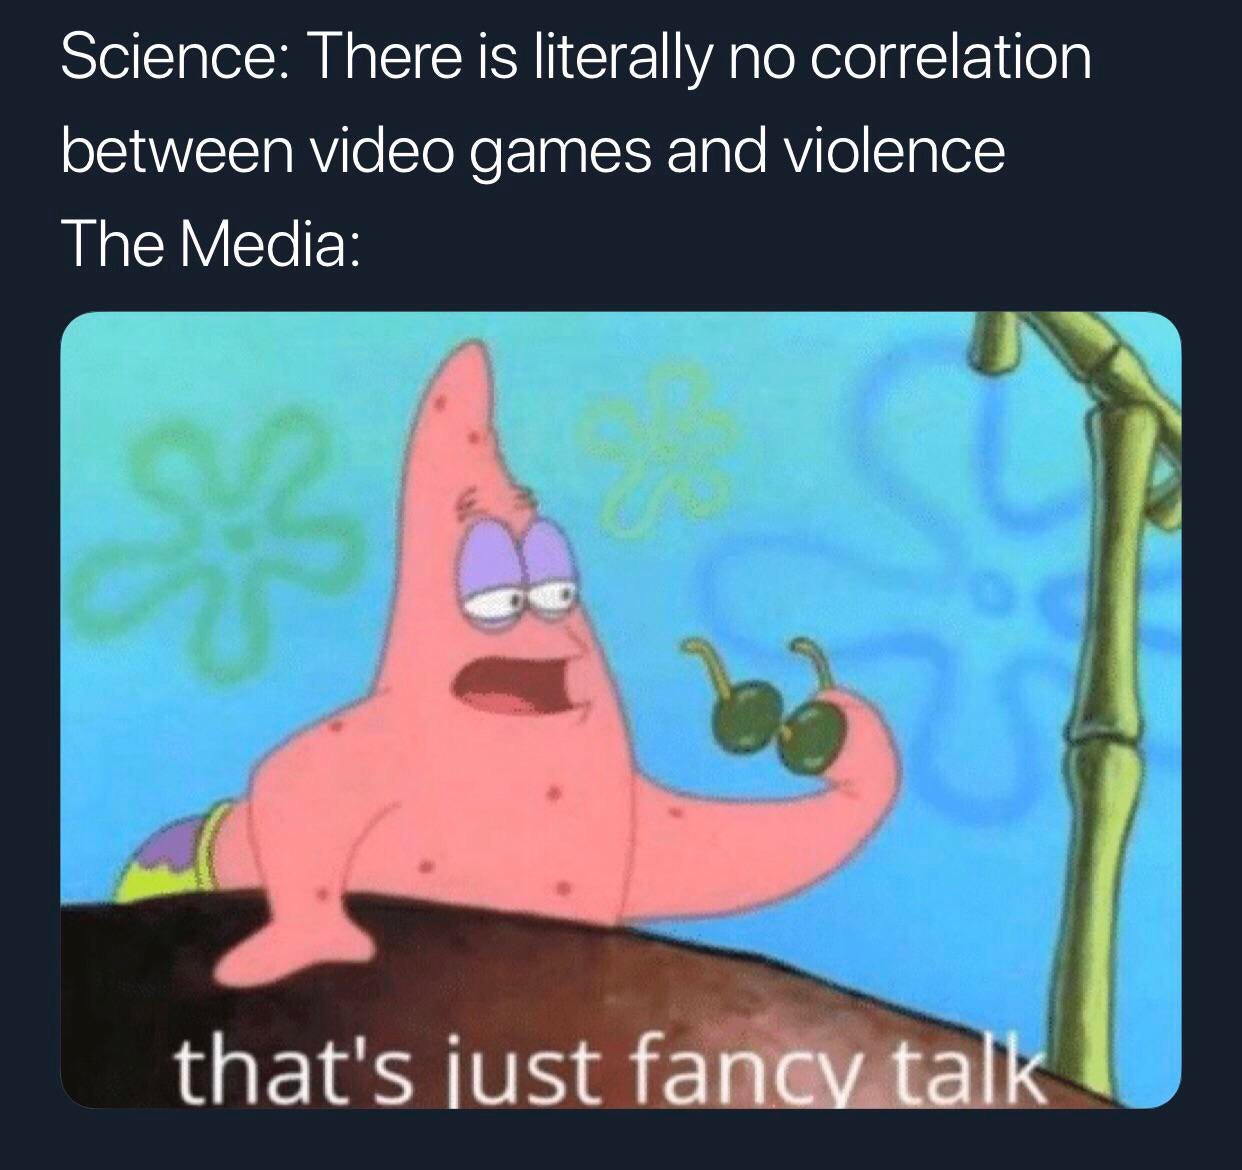 patrick that's just fancy talk - Science There is literally no correlation between video games and violence The Media that's just fancy talk